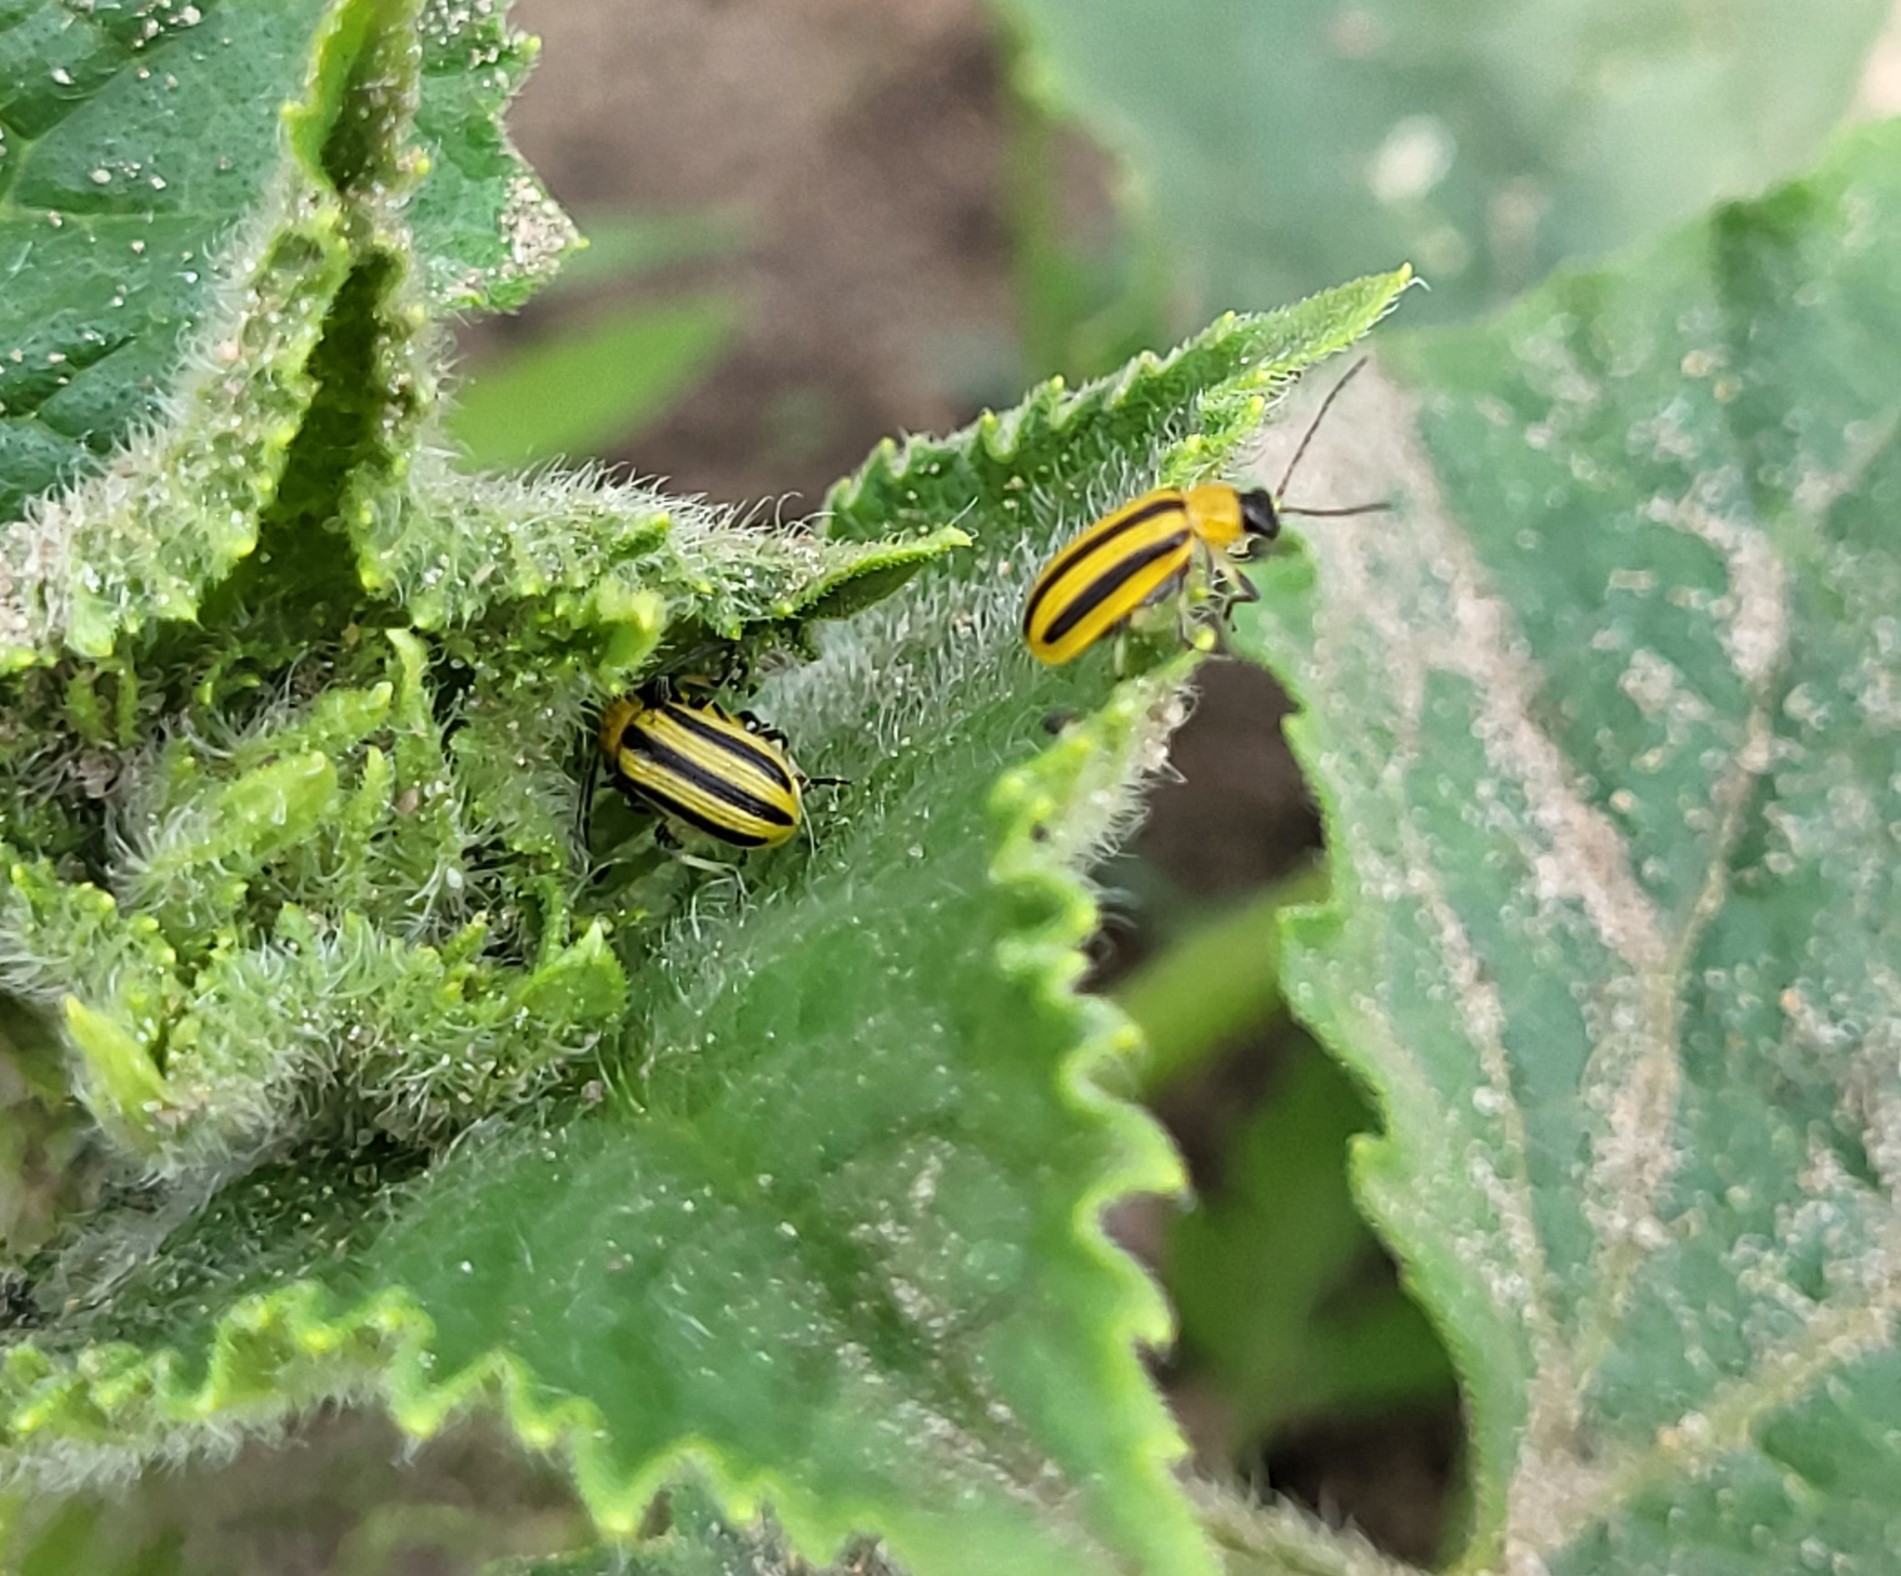 Striped cucumber beetles on leafs.